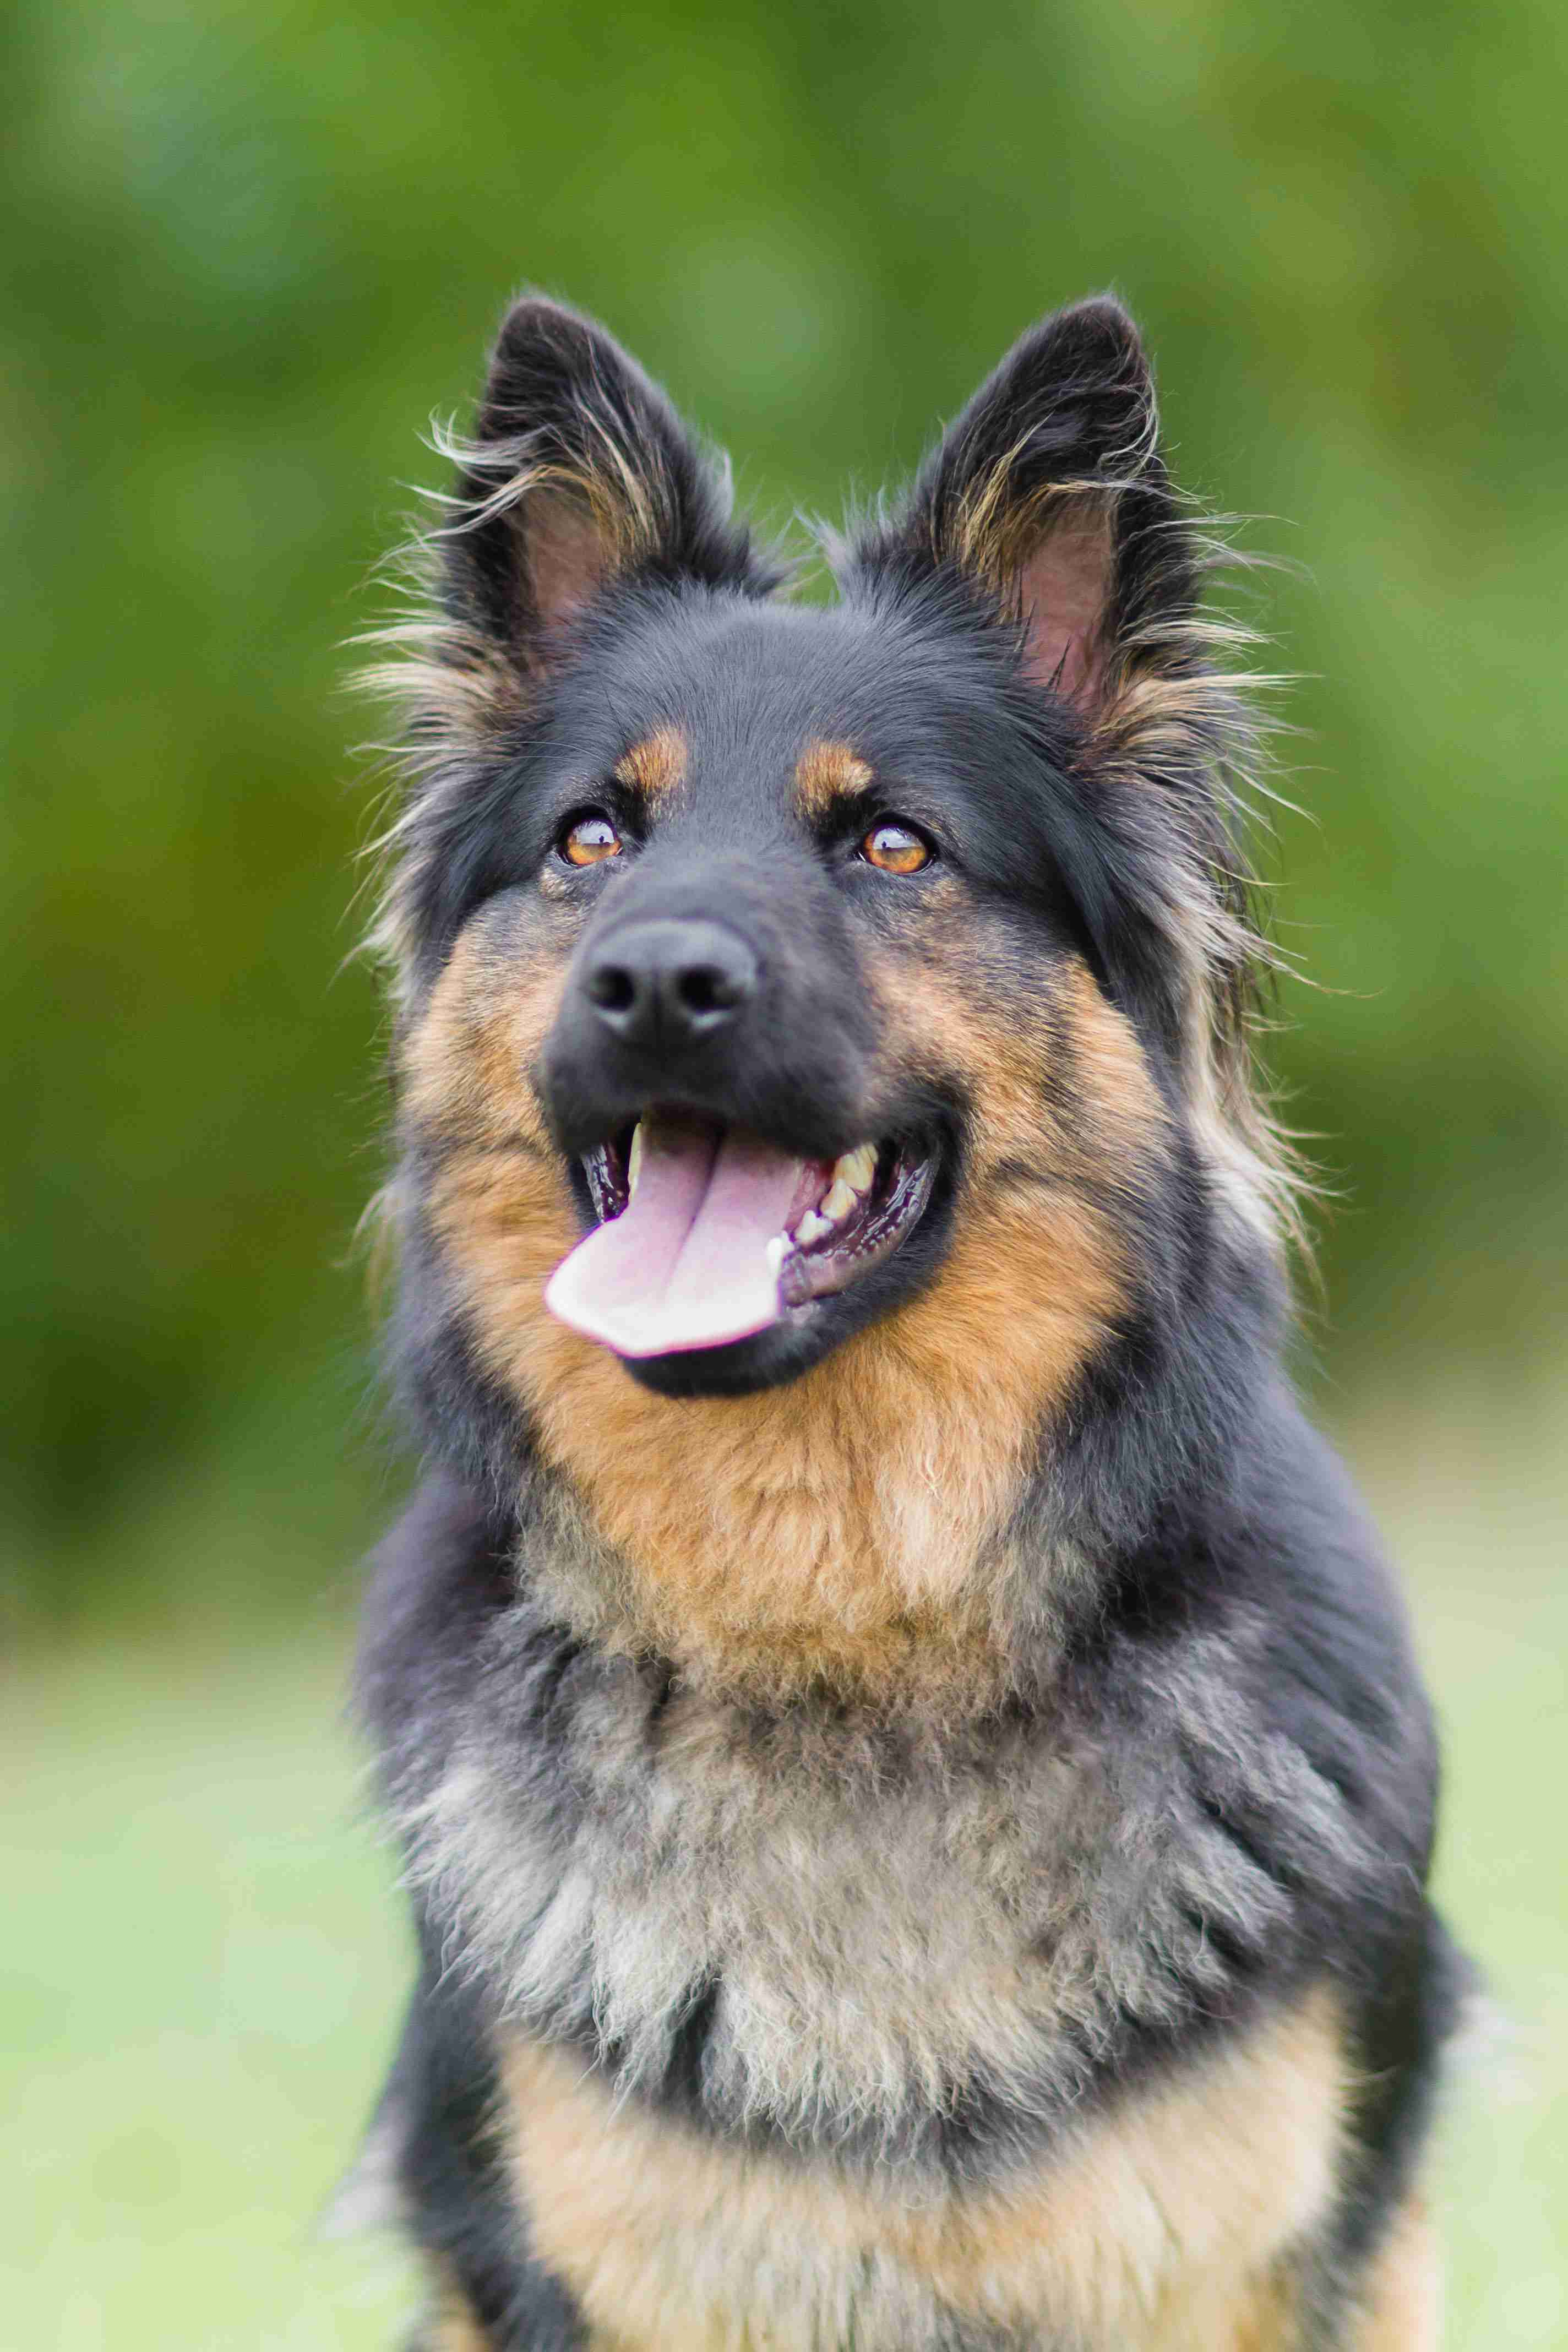 What is the grooming routine for a German shepherd?